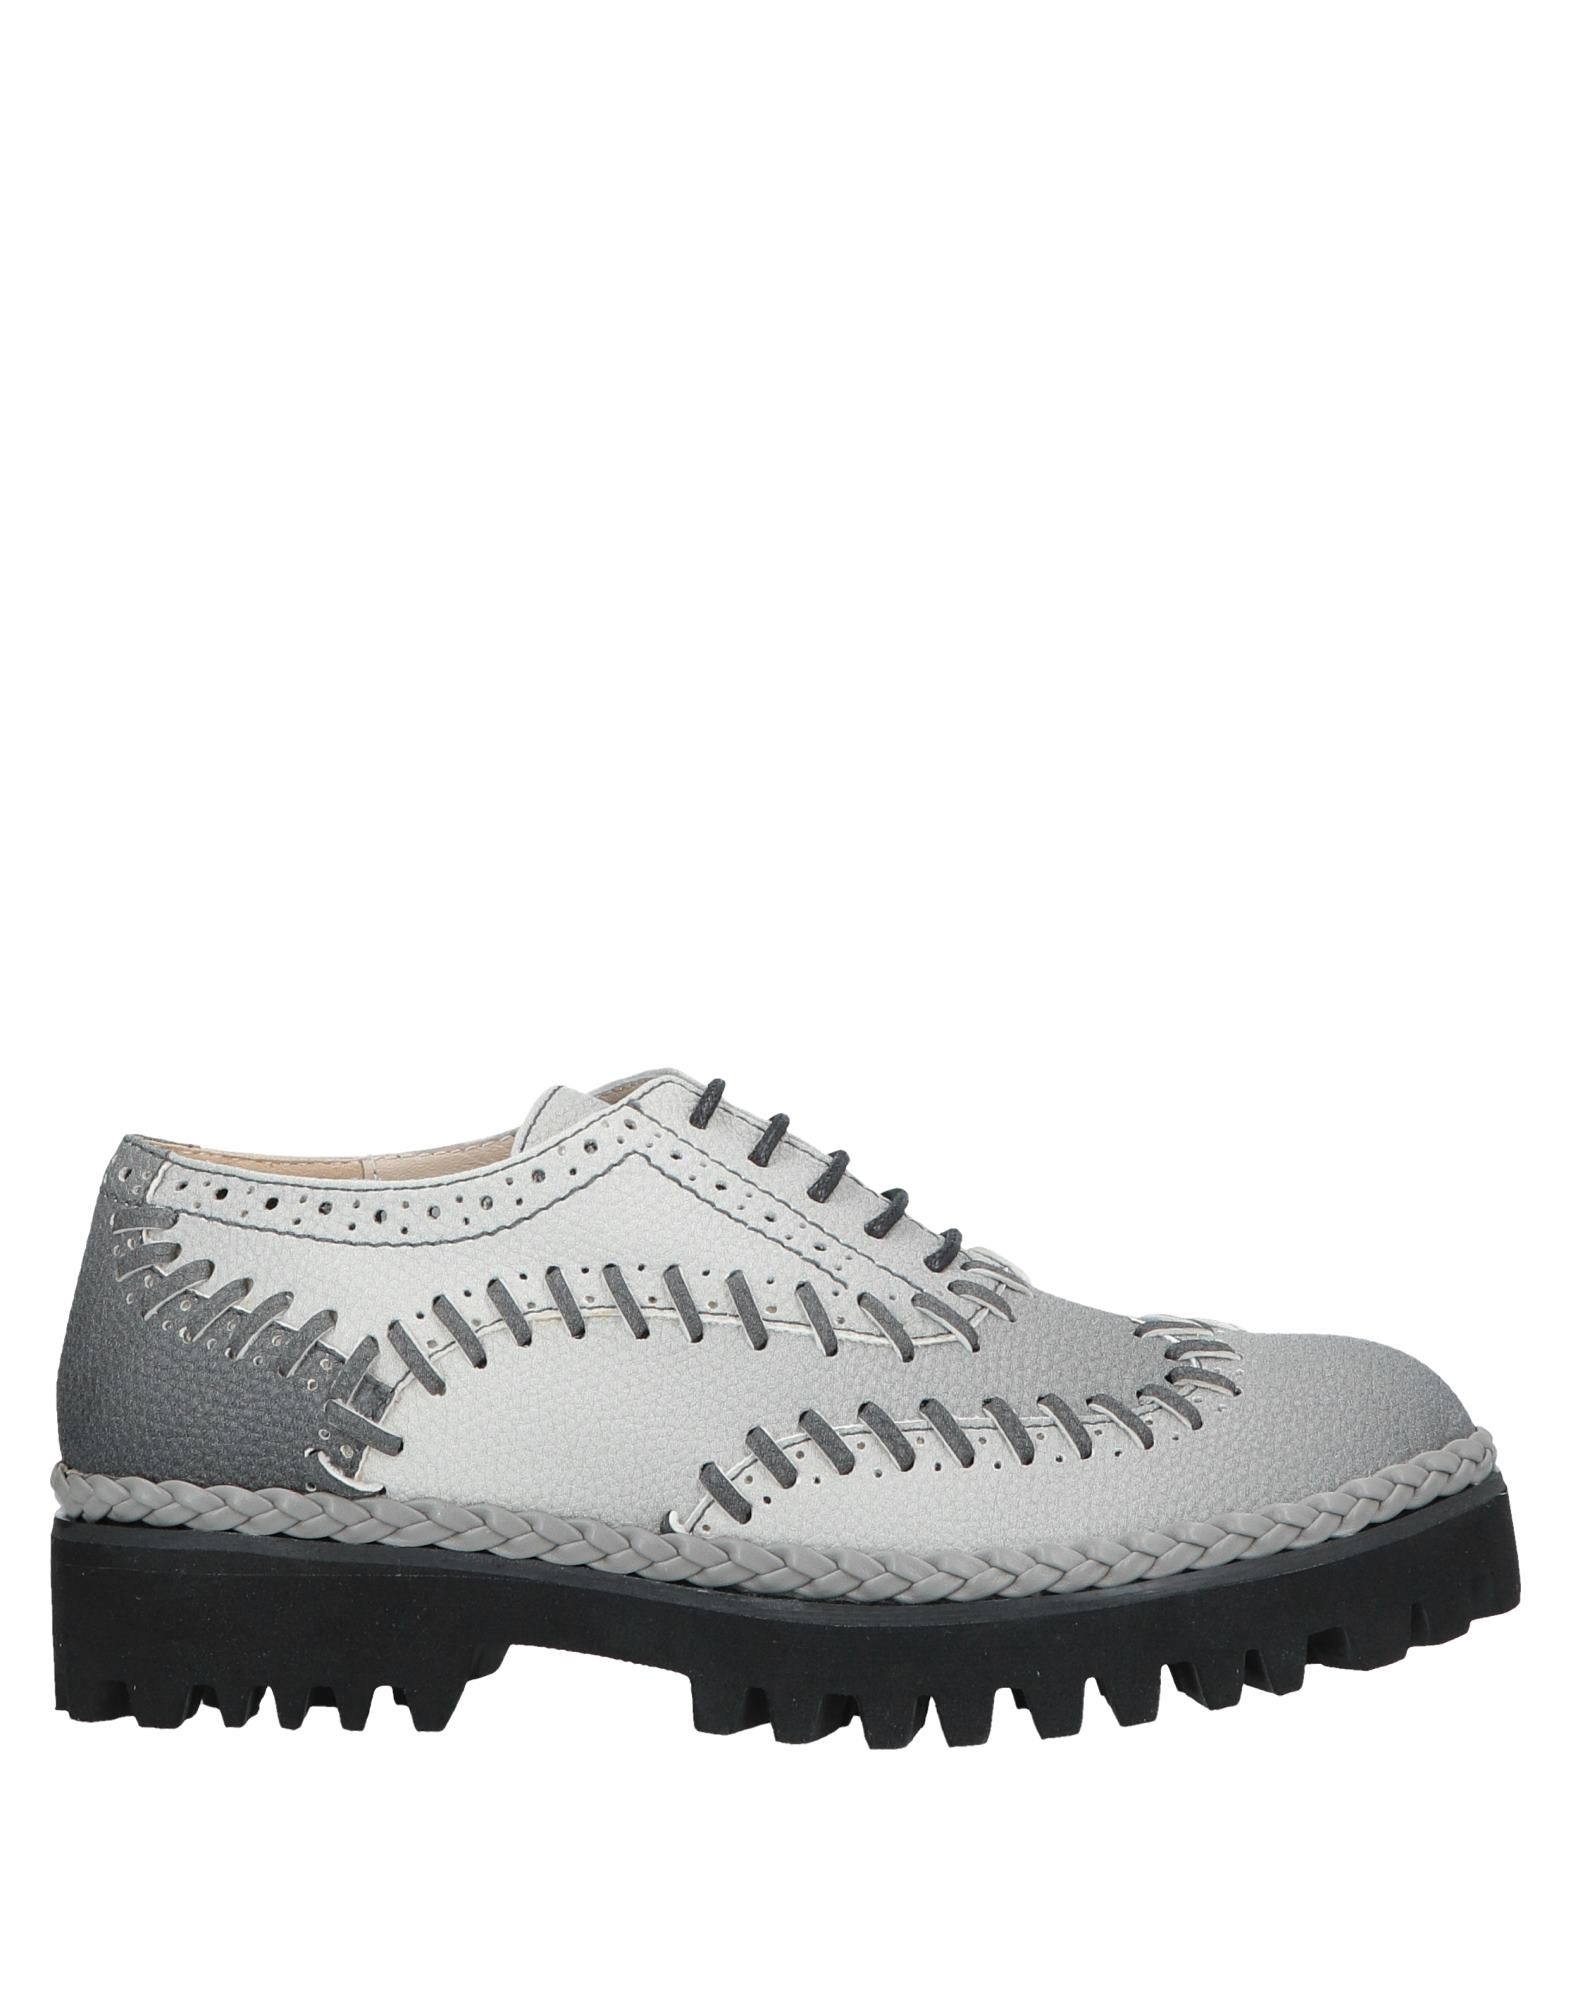 SCERVINO STREET Laced shoes,11670935FP 7